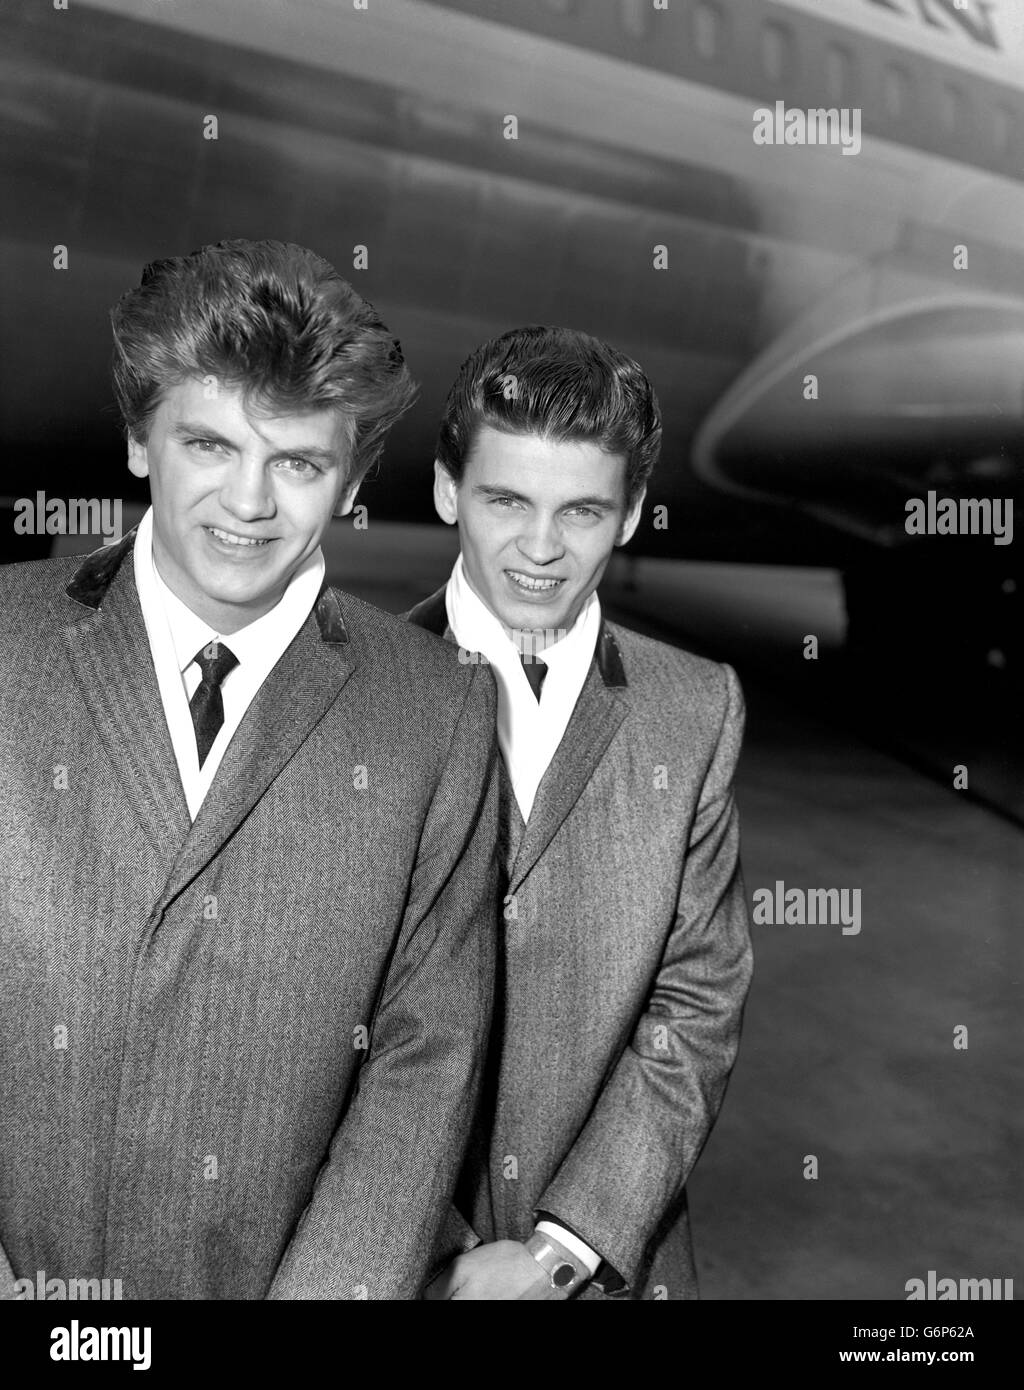 Music - Everly Brothers - London Airport. The Everly Brothers - Phil (l), 21, and Don, 23 - at London Airport for their first tour in Britain. Stock Photo